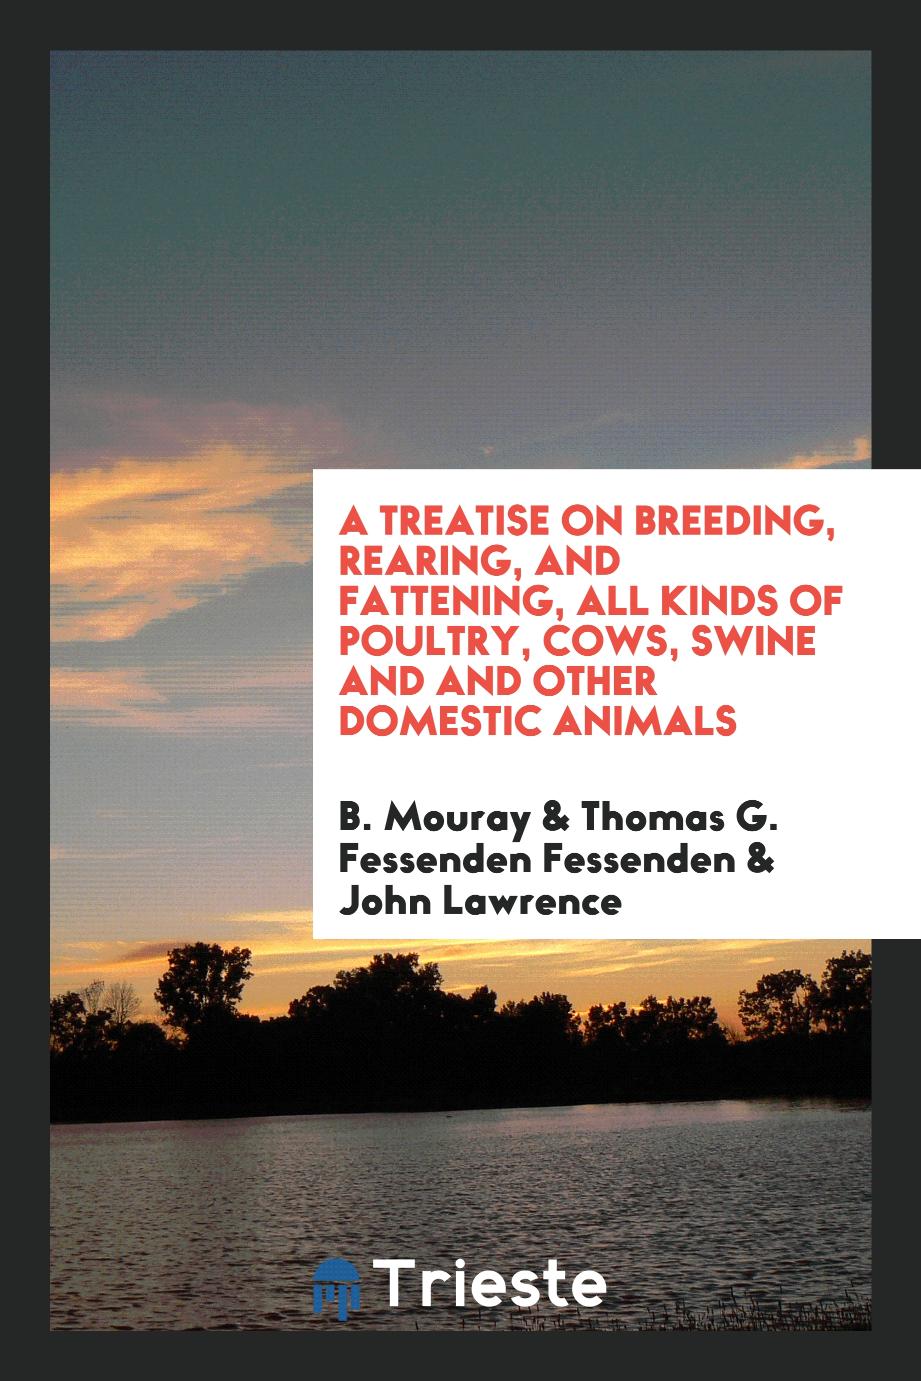 A Treatise on Breeding, Rearing, and Fattening, All Kinds of Poultry, Cows, Swine and and Other Domestic Animals